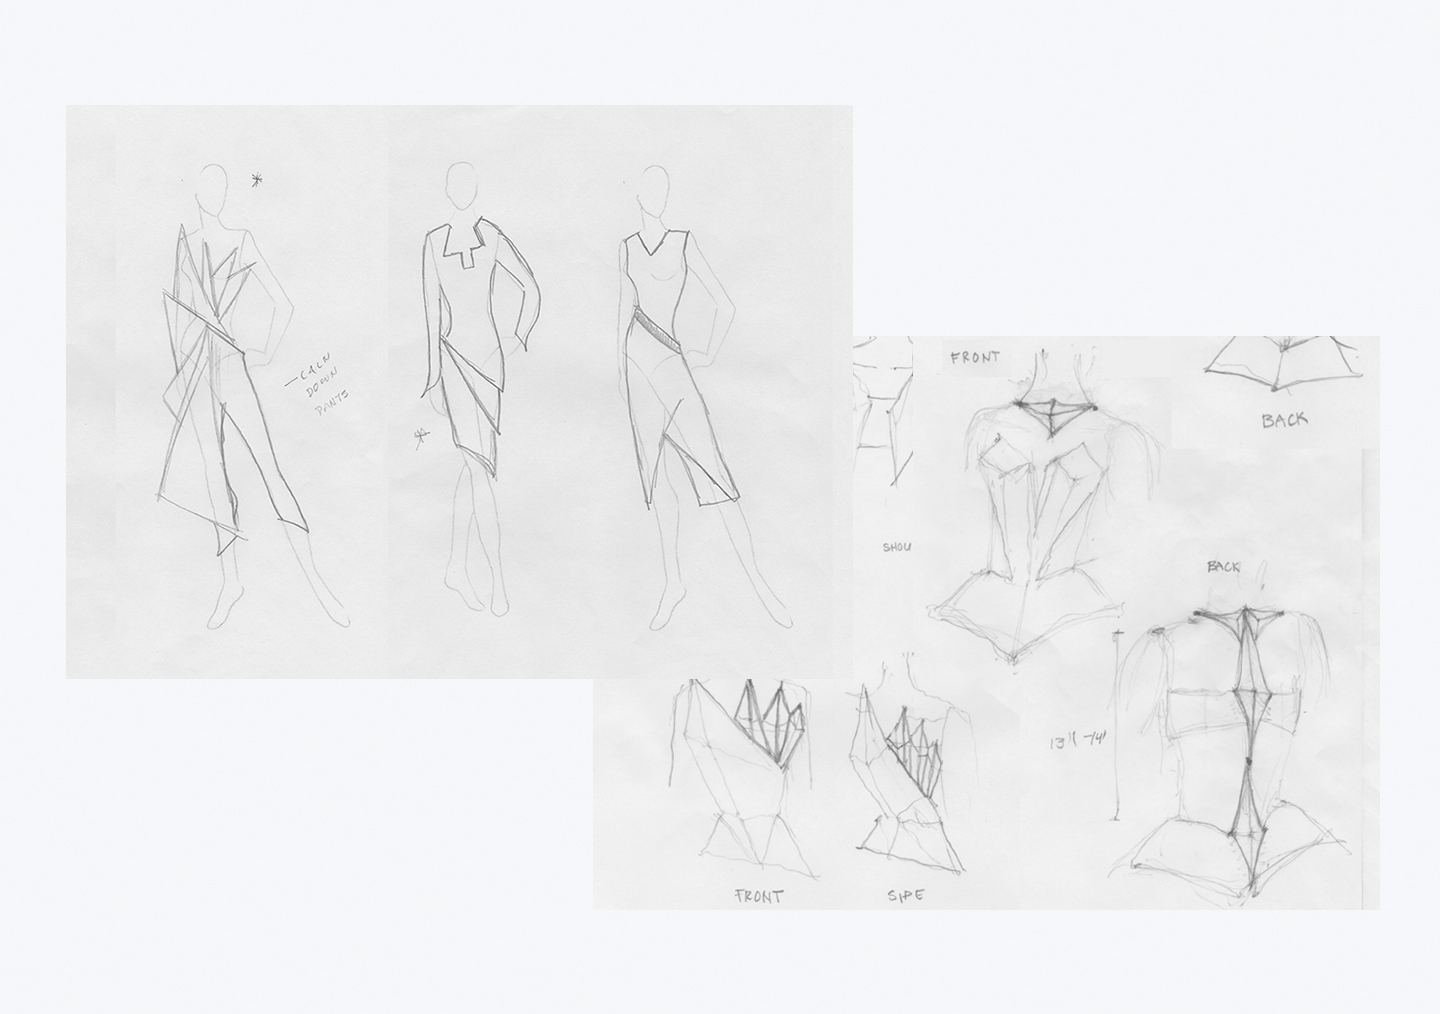 Outfit and 3D print component sketches